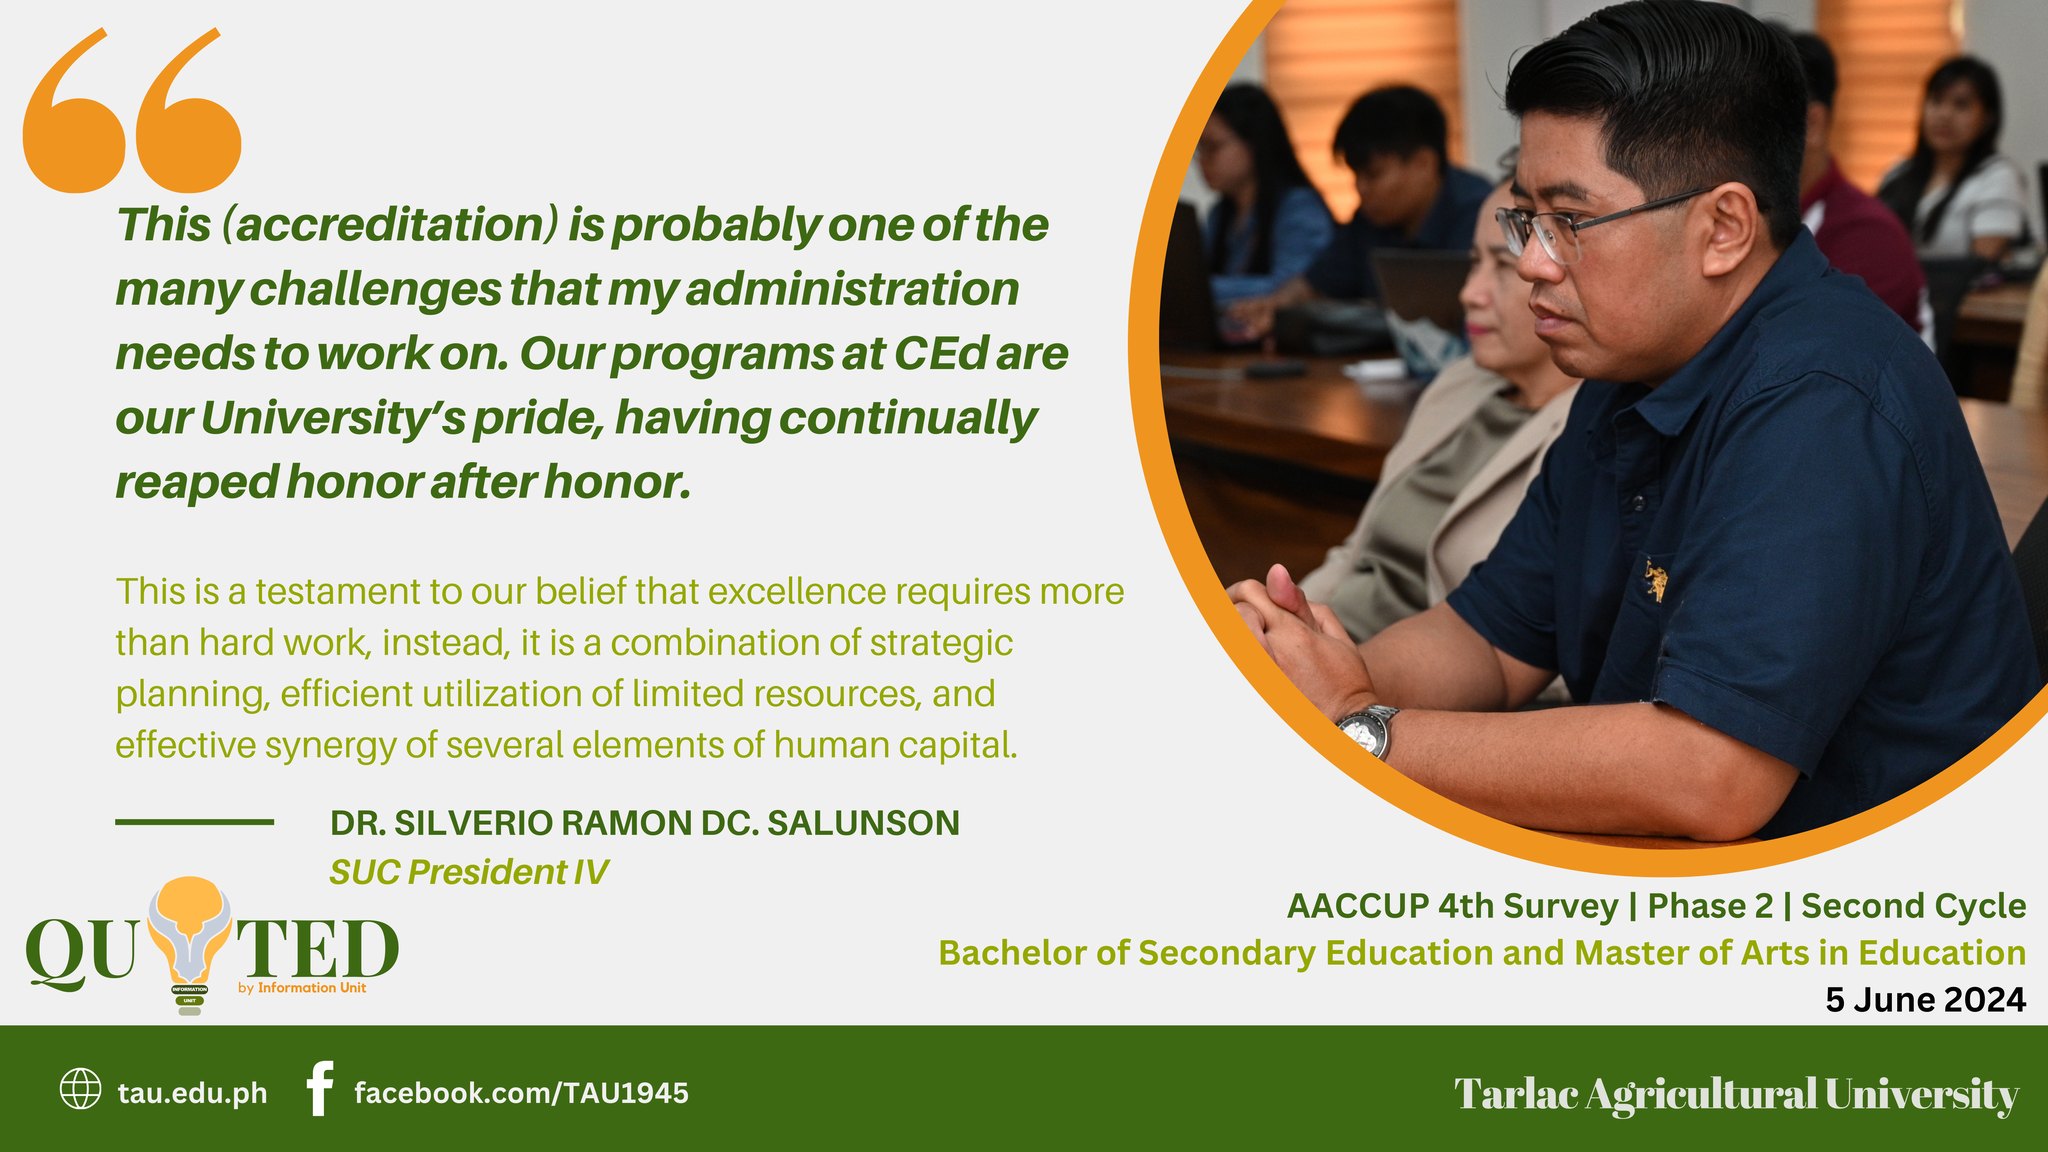 To express his support to the College of Education (CEd), Dr. Silverio Ramon DC. Salunson, TAU President, conveys his solidarity message to the CEd community as it undergoes the 4th Survey Phase 2 Second Cycle for Bachelor of Secondary Education (BSEd) and Master of Arts in Education (MAEd), 5 June.